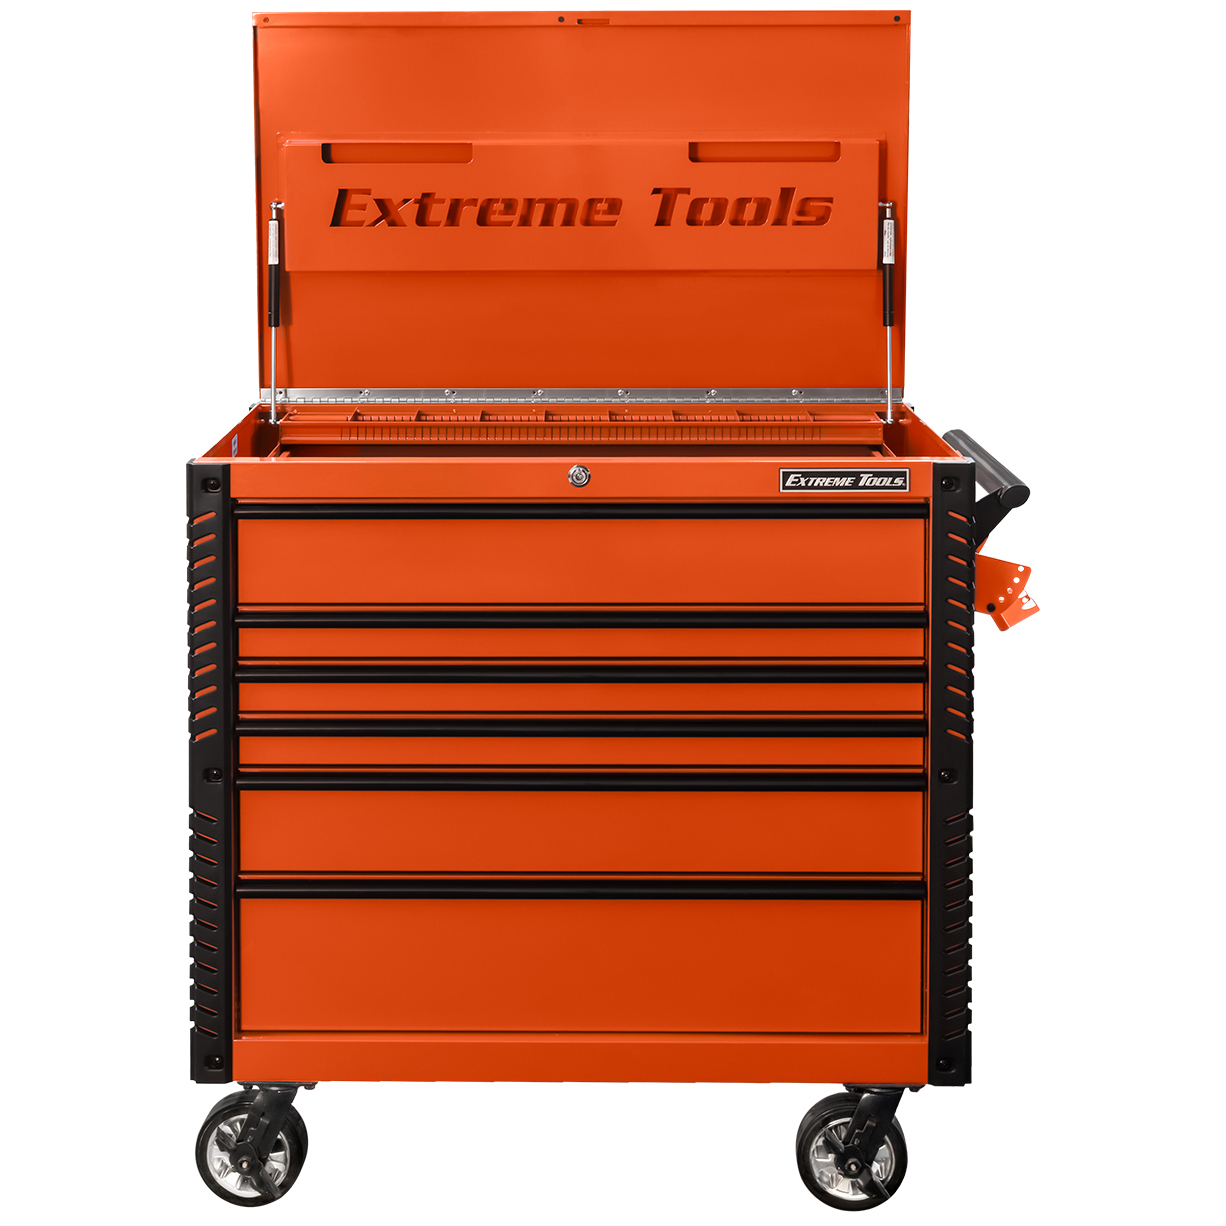 https://rockintoolboxes.com/wp-content/uploads/2020/05/EX4106TCORBK-Front-Open-Extreme-Tools-41-6-Drawer-Deluxe-Tool-Cart-with-Pry-Bar-Holders-And-Flip-Top.jpg